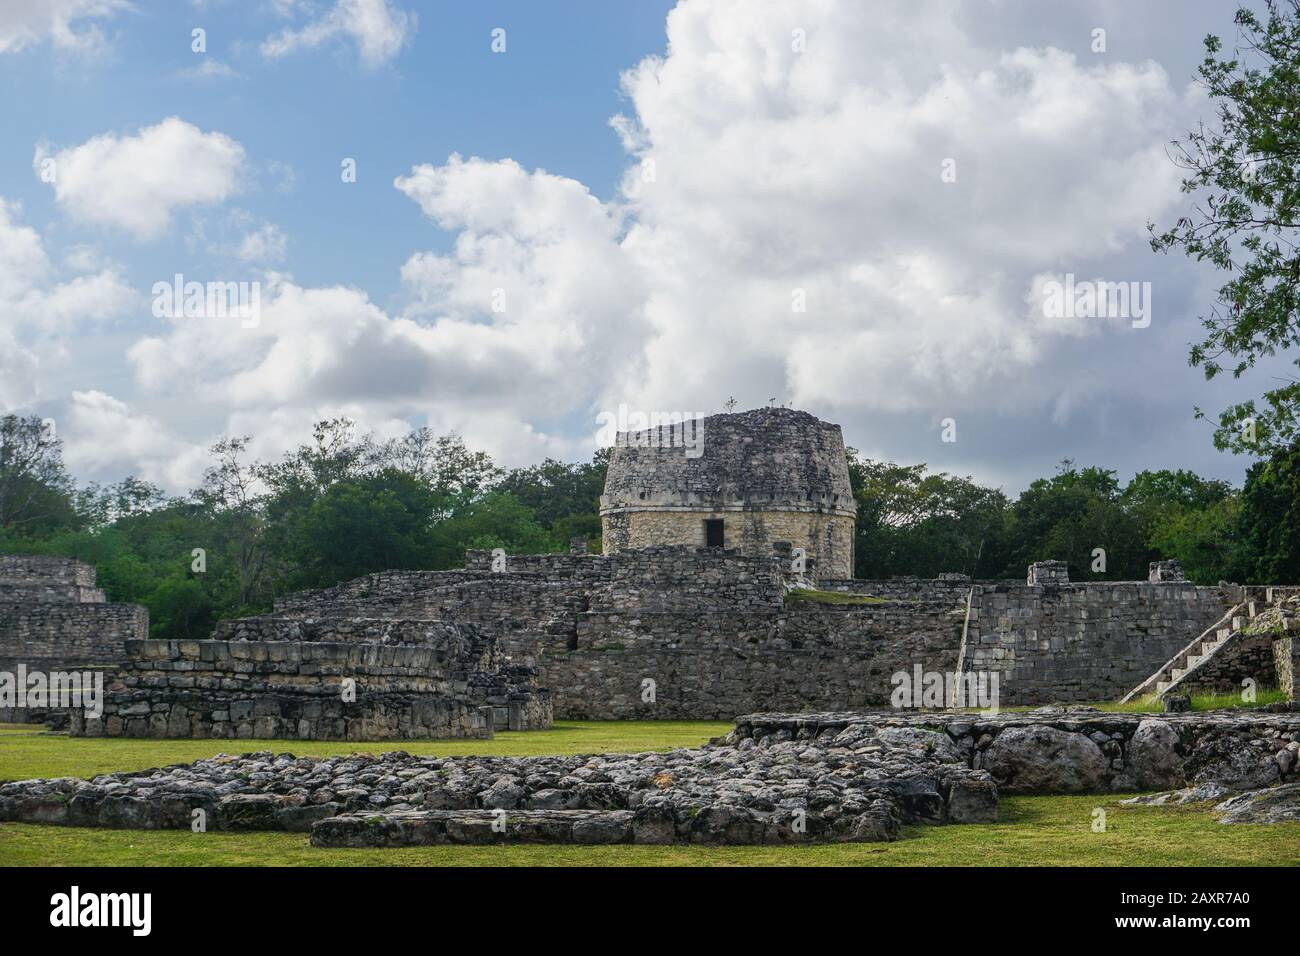 Mayapan, Yucatan, Mexico: El Templo Redondo -- The Round Temple -- with other Mayan ruins in the foreground. Stock Photo